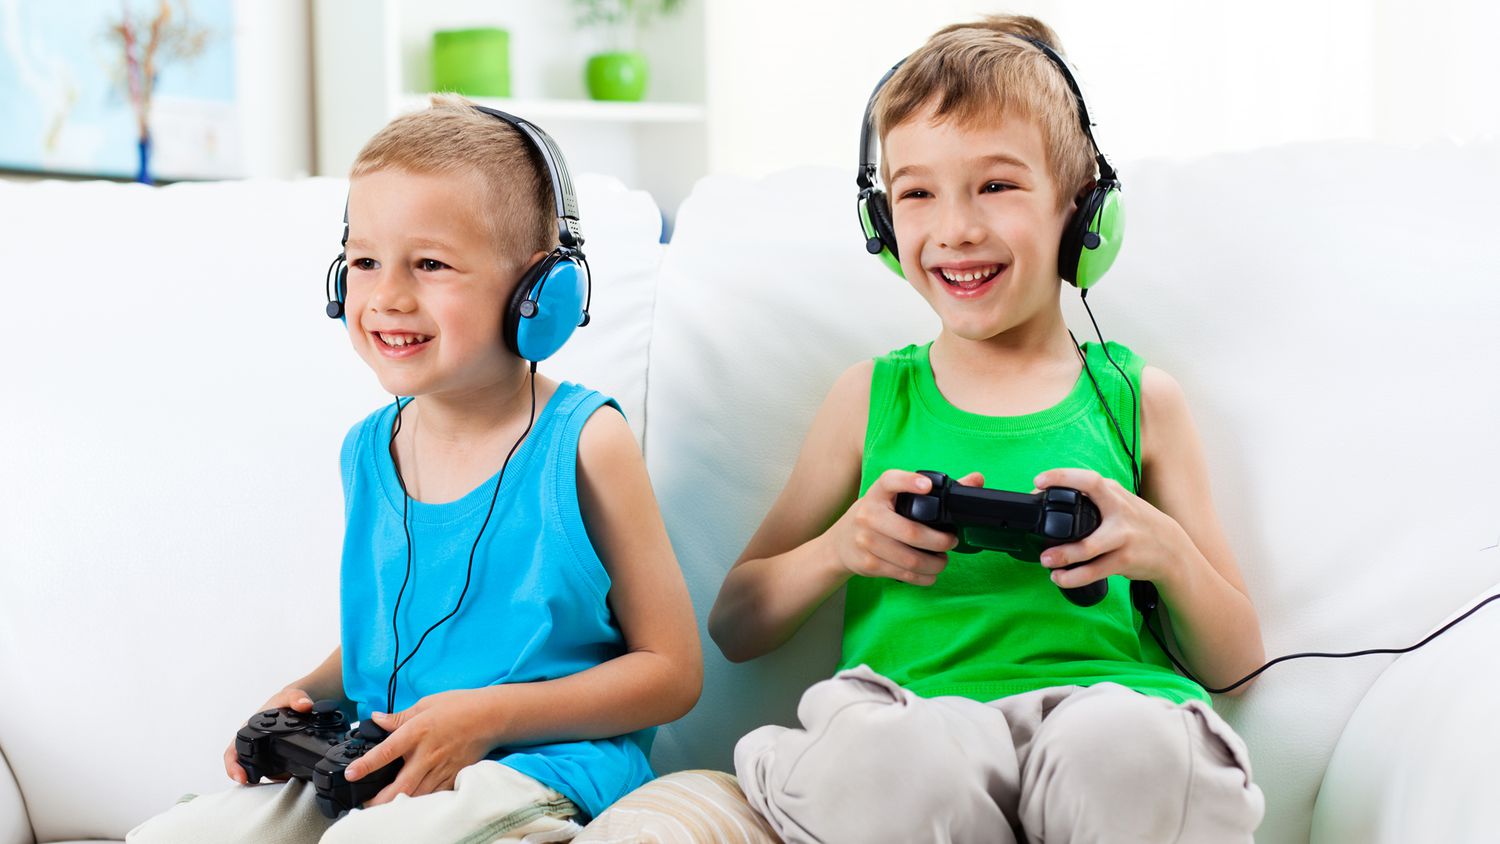 KIDS RISK HEARING LOSS FROM ONLINE GAMING